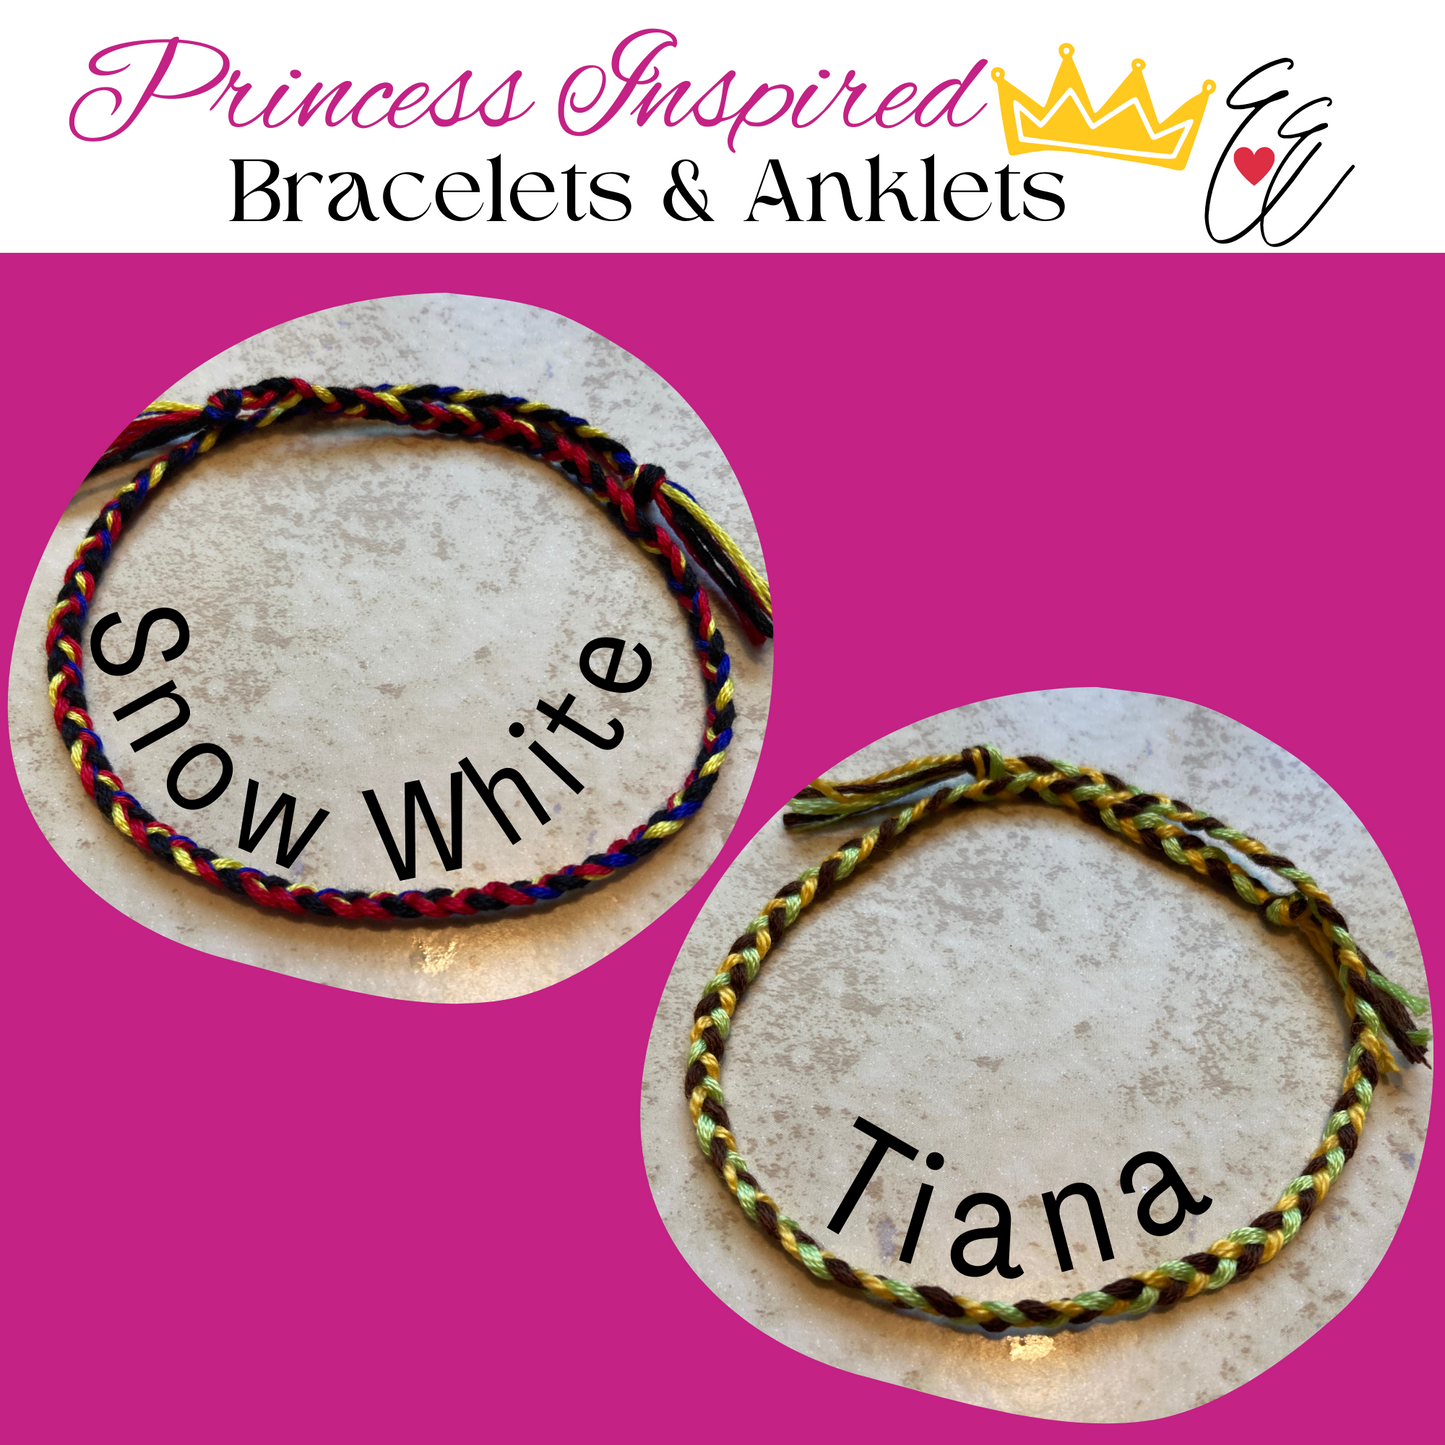 Princess Inspired Thread Braided Friendship Bracelets and Anklets